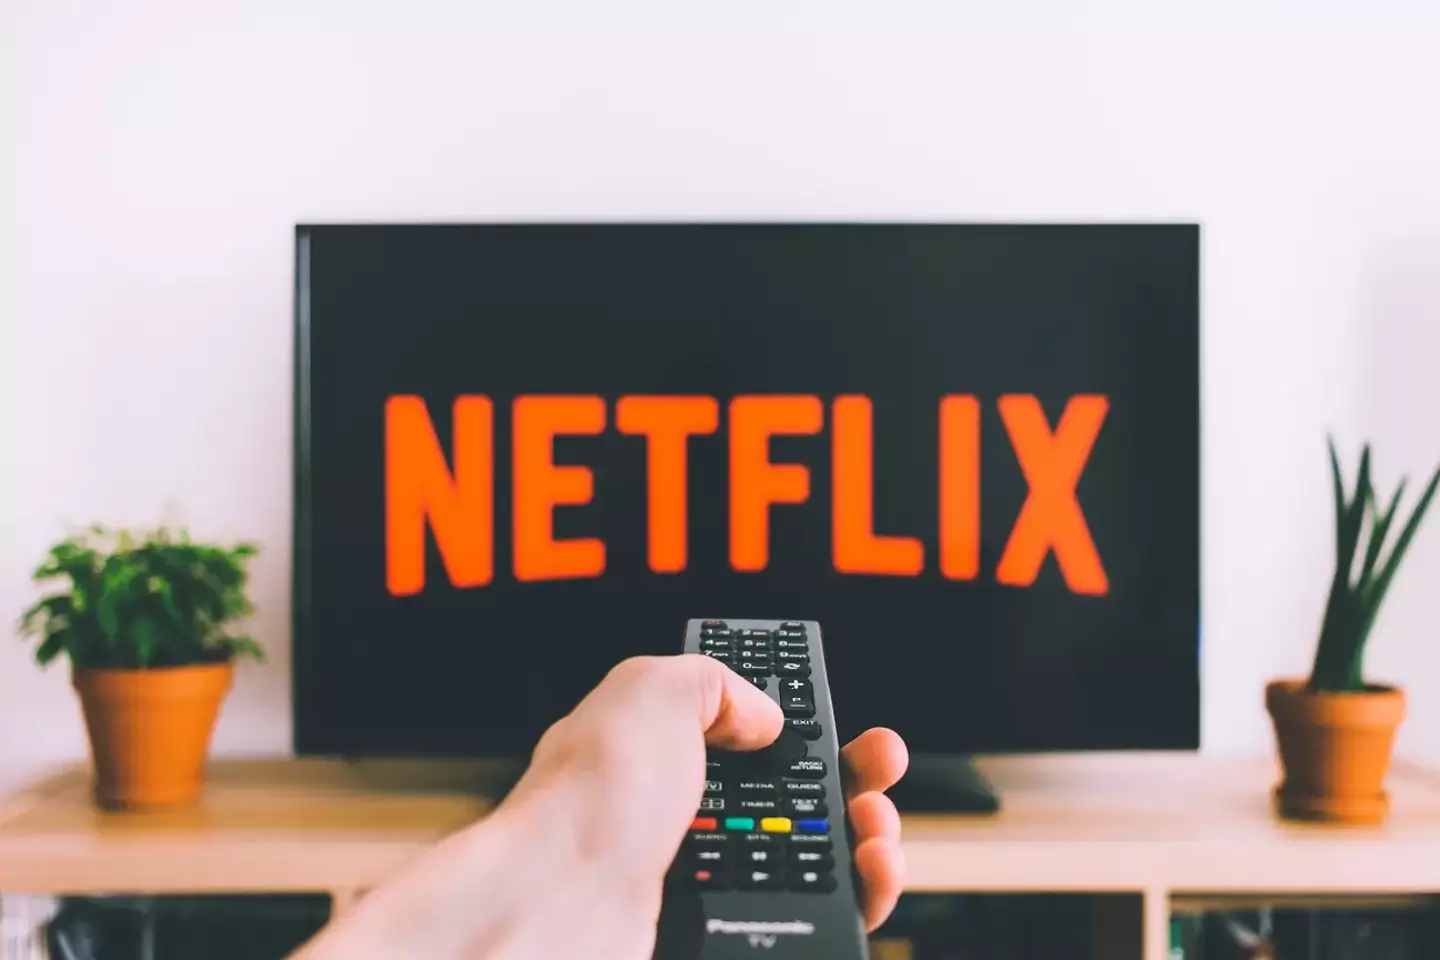 Netflix has made another announcement about the latest update with their password sharing ban.